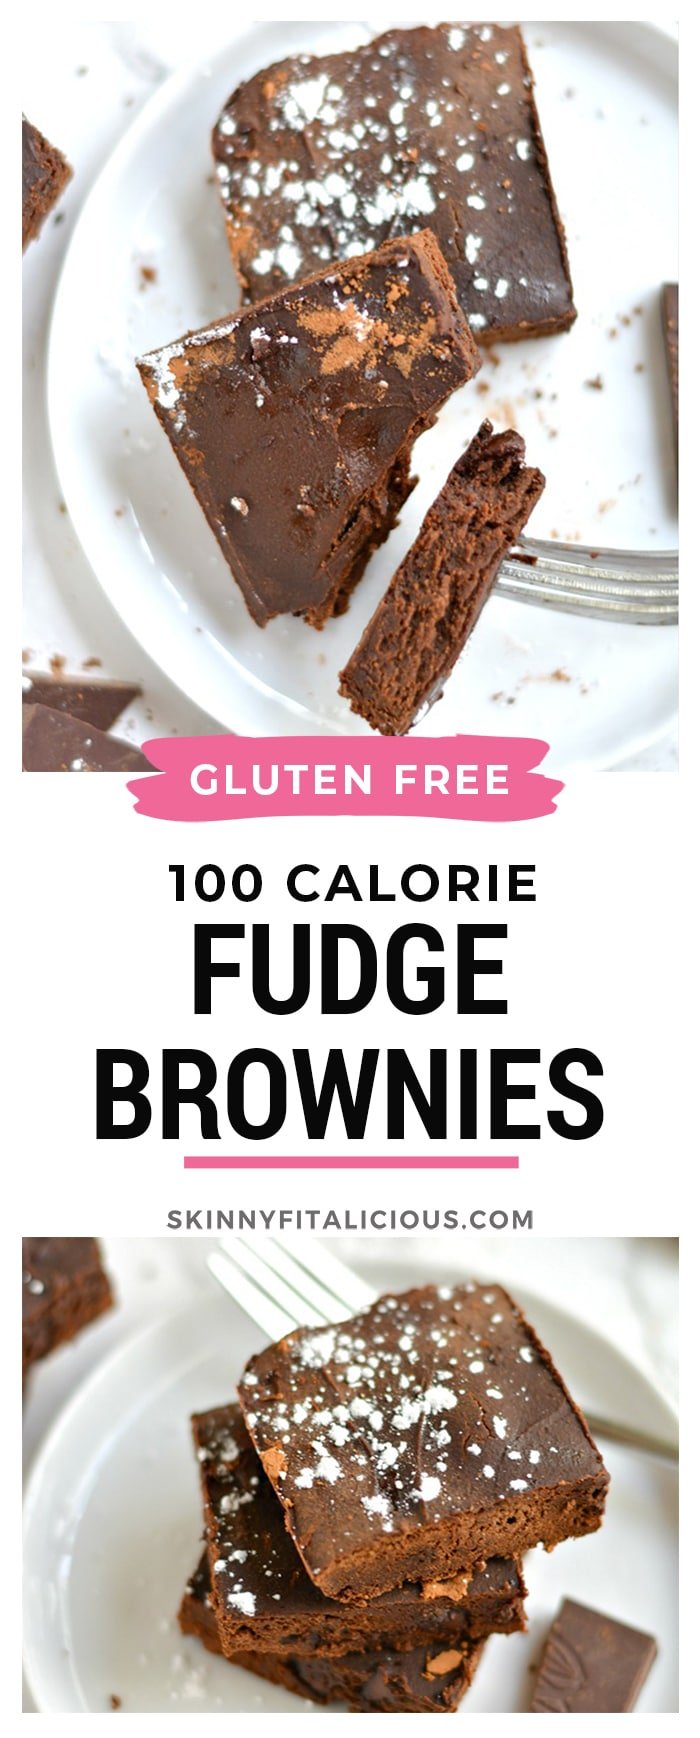 Silky 100 Calorie Fudge Brownies made healthy with rich dark chocolate and no added sugar or refined oil. The perfect chocolatey treat to satisfy a sweet tooth! Low Calorie + Gluten Free recipe!